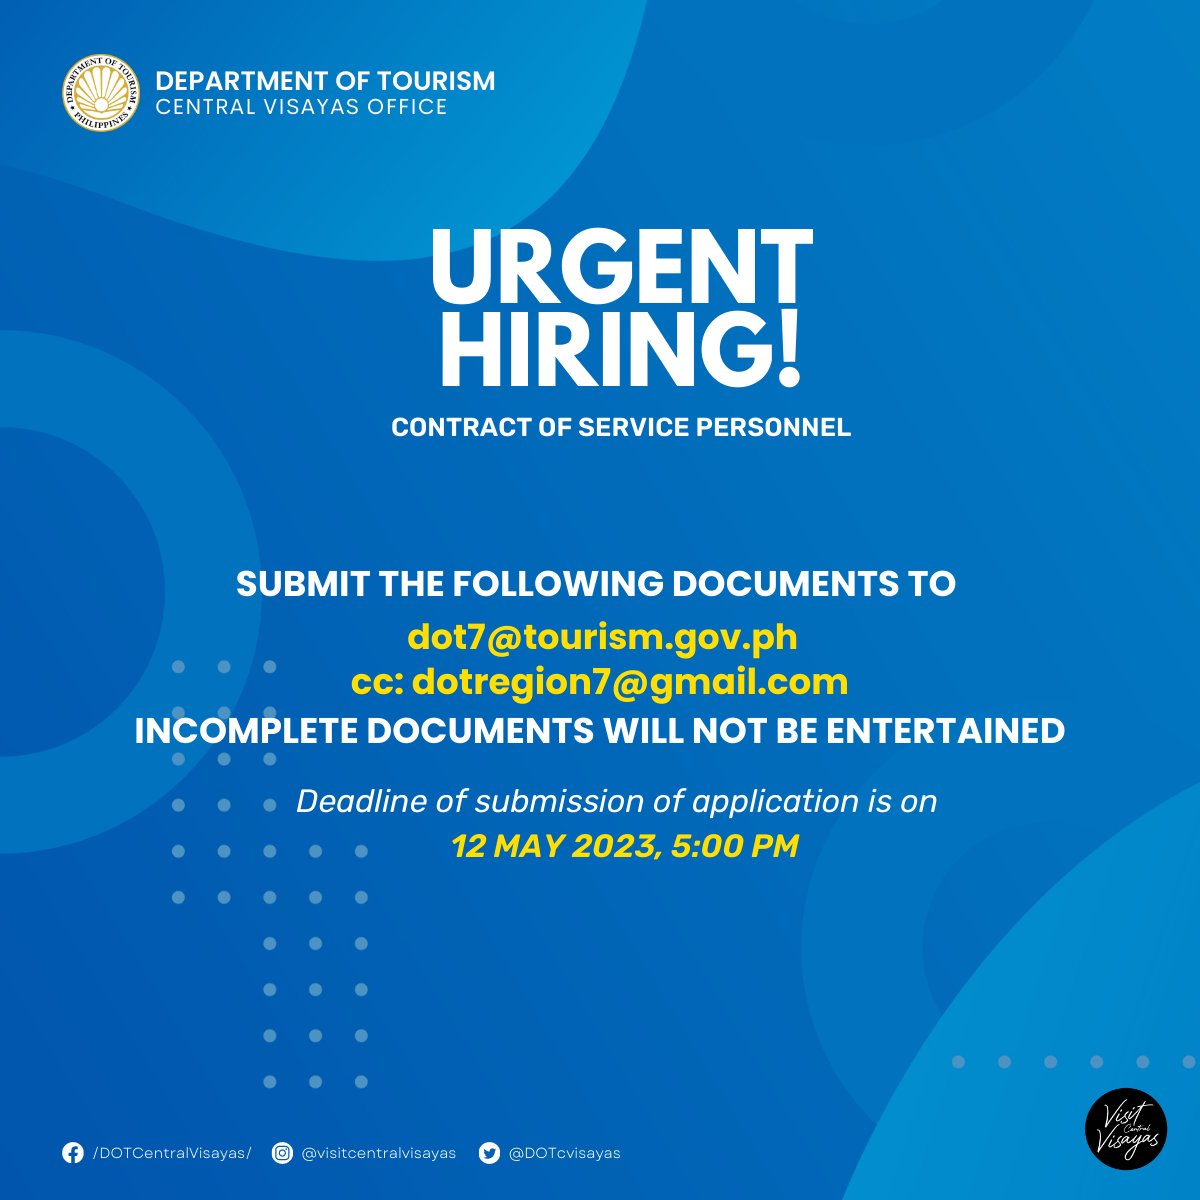 INCOMPLETE DOCUMENTS WILL NOT BE ENTERTAINED

Deadline of submission of application is on
12 May 2023, 5:00 PM.

#UrgentHiring #JobHiring #VisitCentralVisayas #MoreFunAwaits